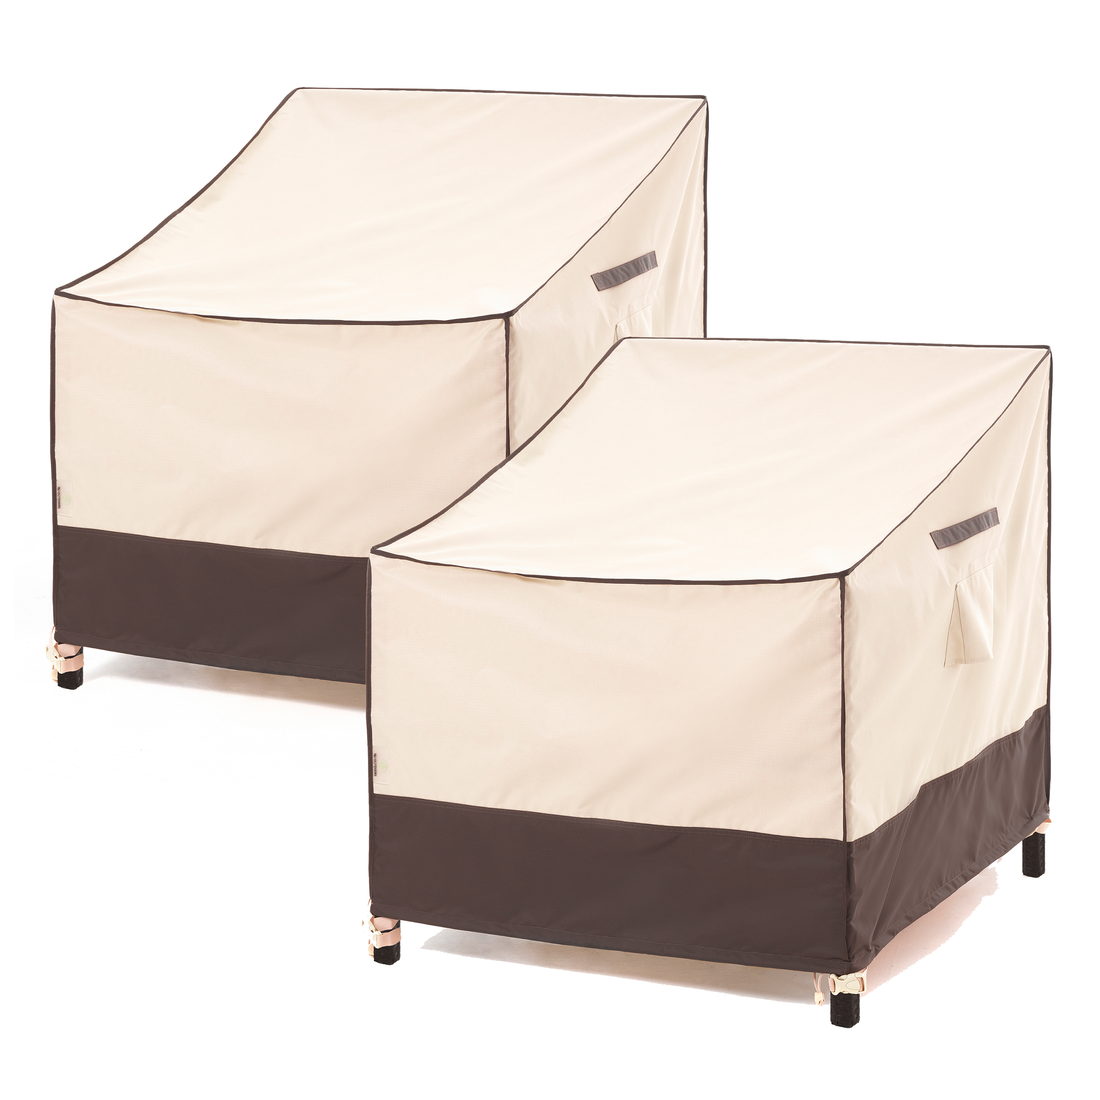 2024 Edition Patio Chair Covers - Beige+Coffee - 2 Packs